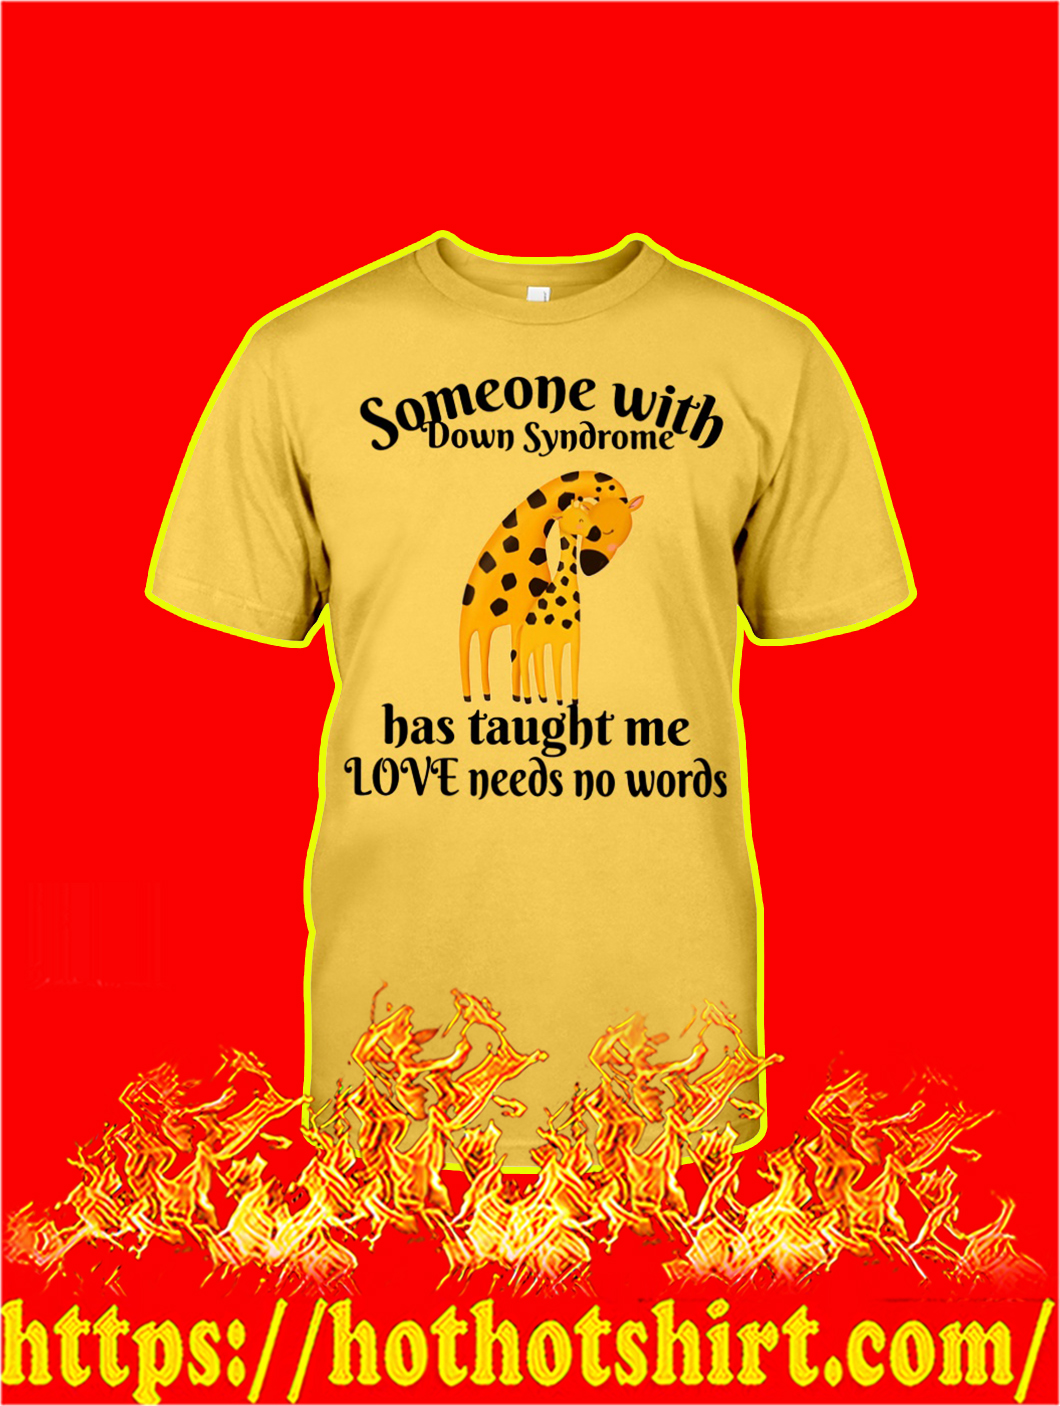 Someone With Down Syndrome Has Taught Me Love Needs No Words shirt and hoodie